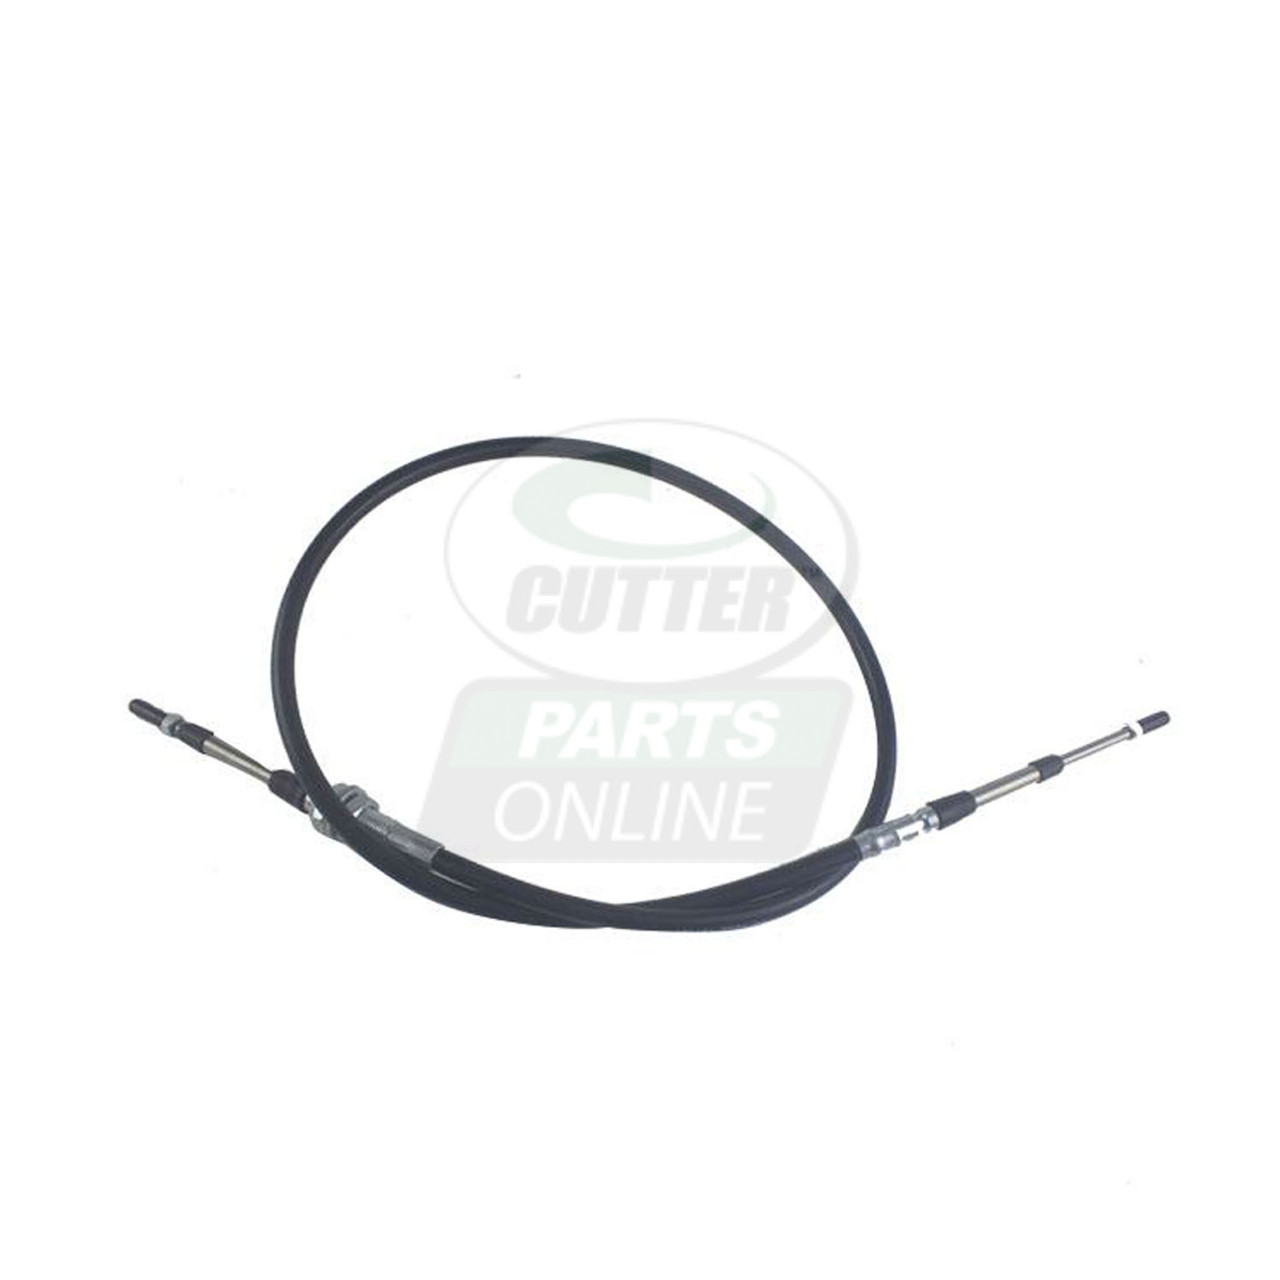 New Cable - Traction - Replaces Toro 106-5233